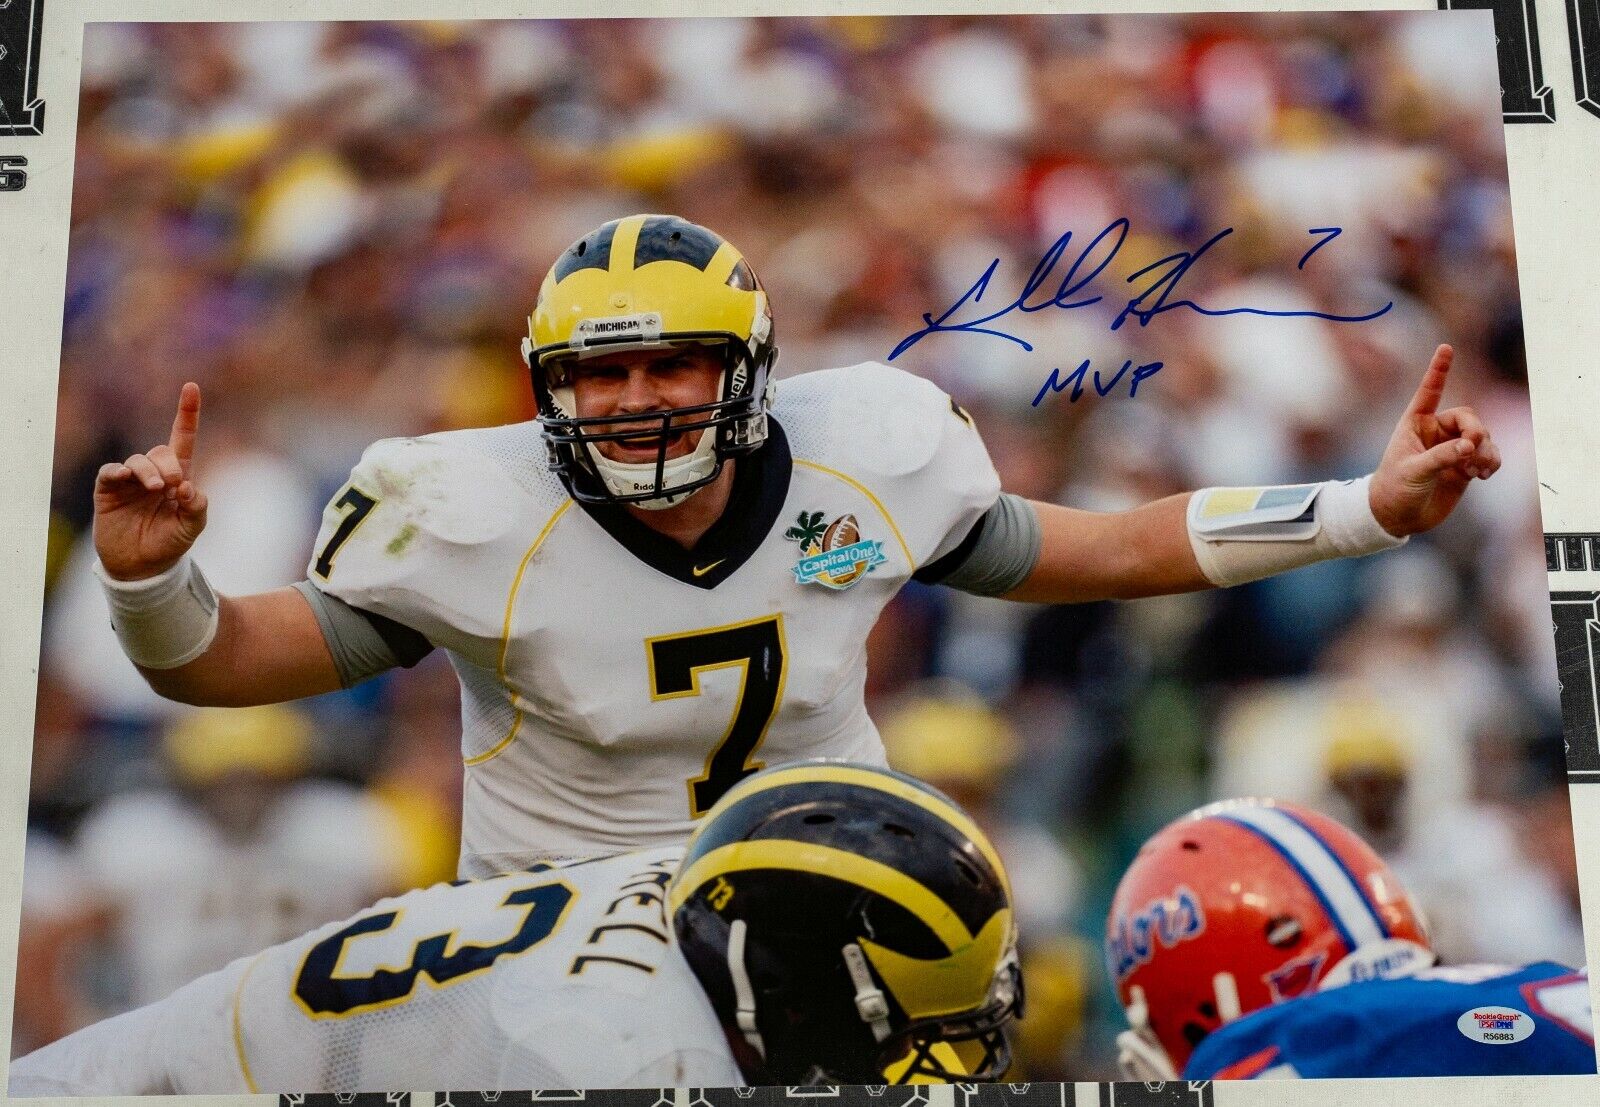 Chad Henne Signed Michigan Wolverines Football 16x20 Photo Poster painting PSA/DNA COA Autograph